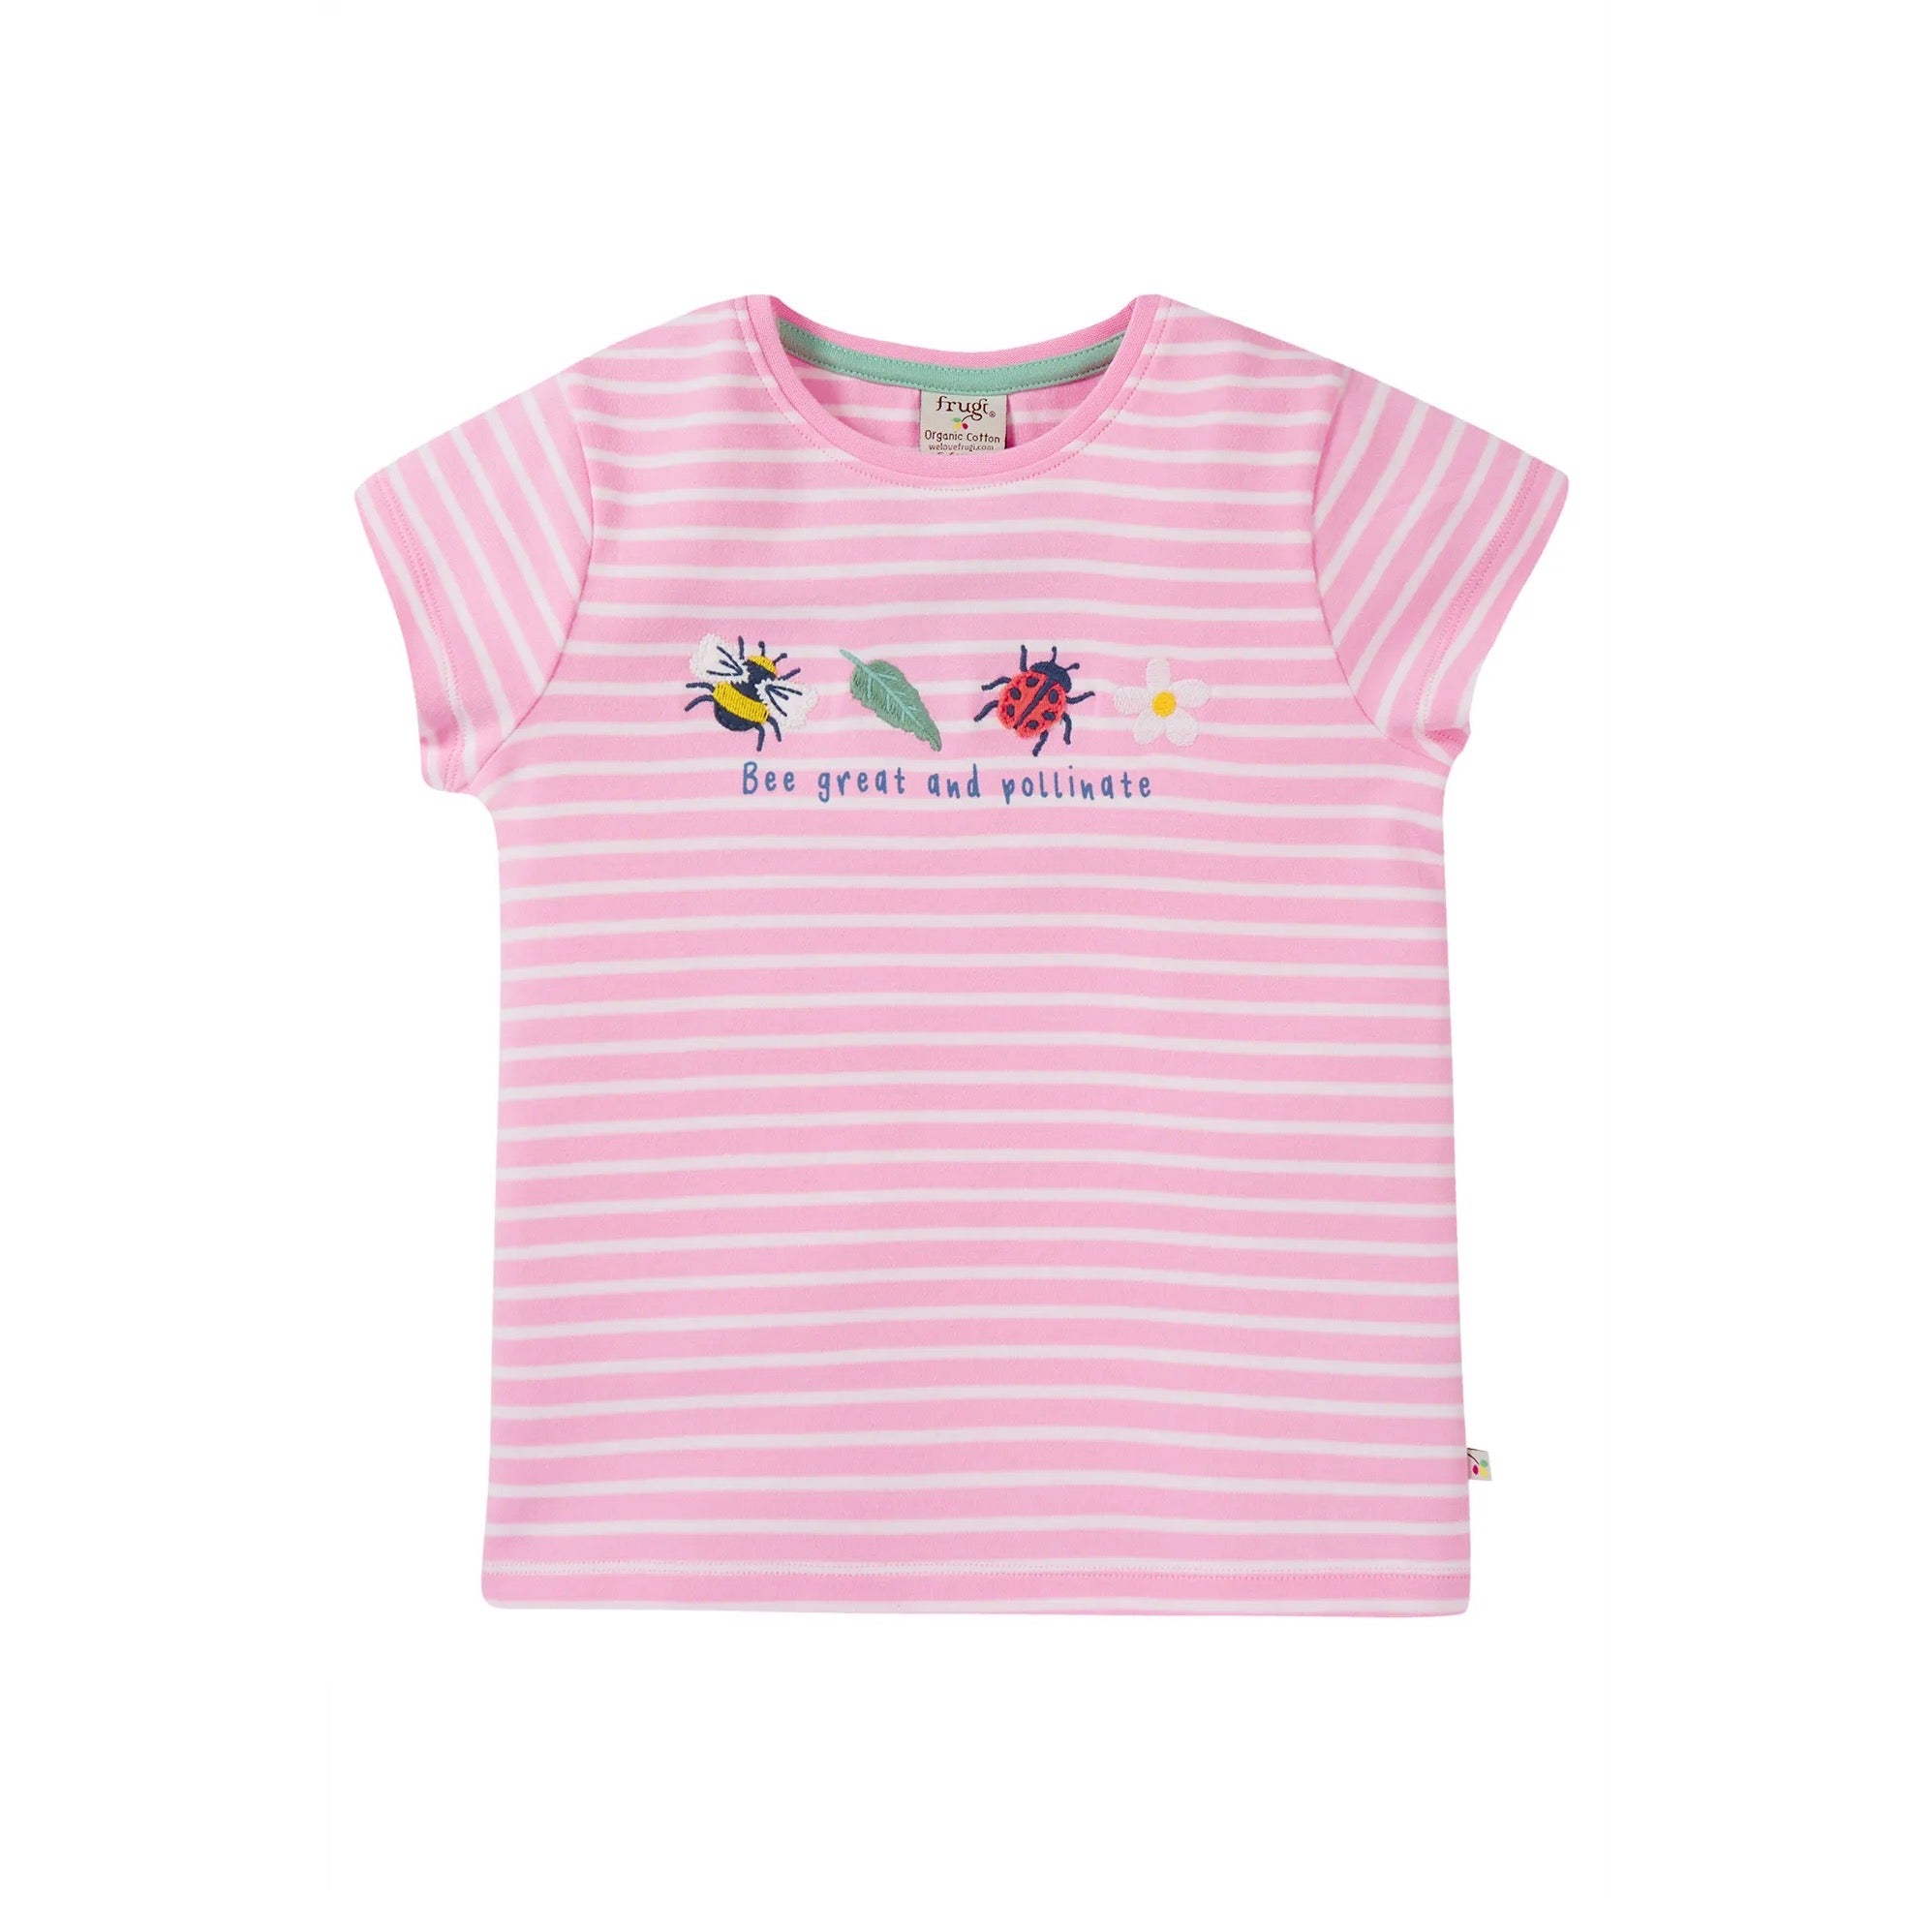 Frugi Camille Bee Great T-Shirt Pe1pi Clothing 4-5YRS / Pink,5-6YRS / Pink,6-7YRS / Pink,7-8YRS / Pink,8-9YRS / Pink